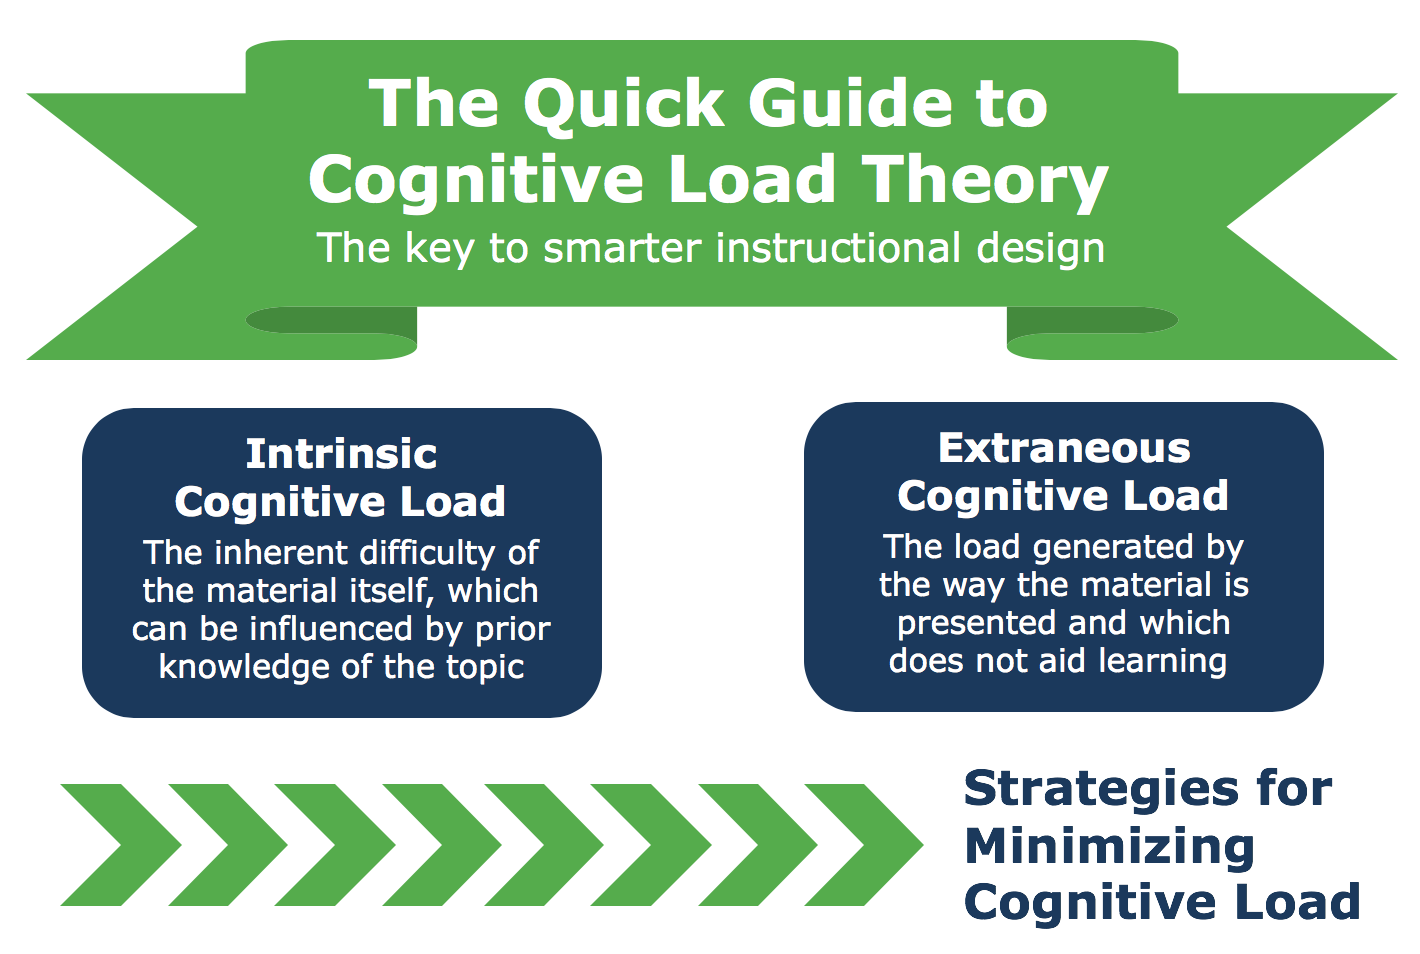 critical thinking cognitive load theory